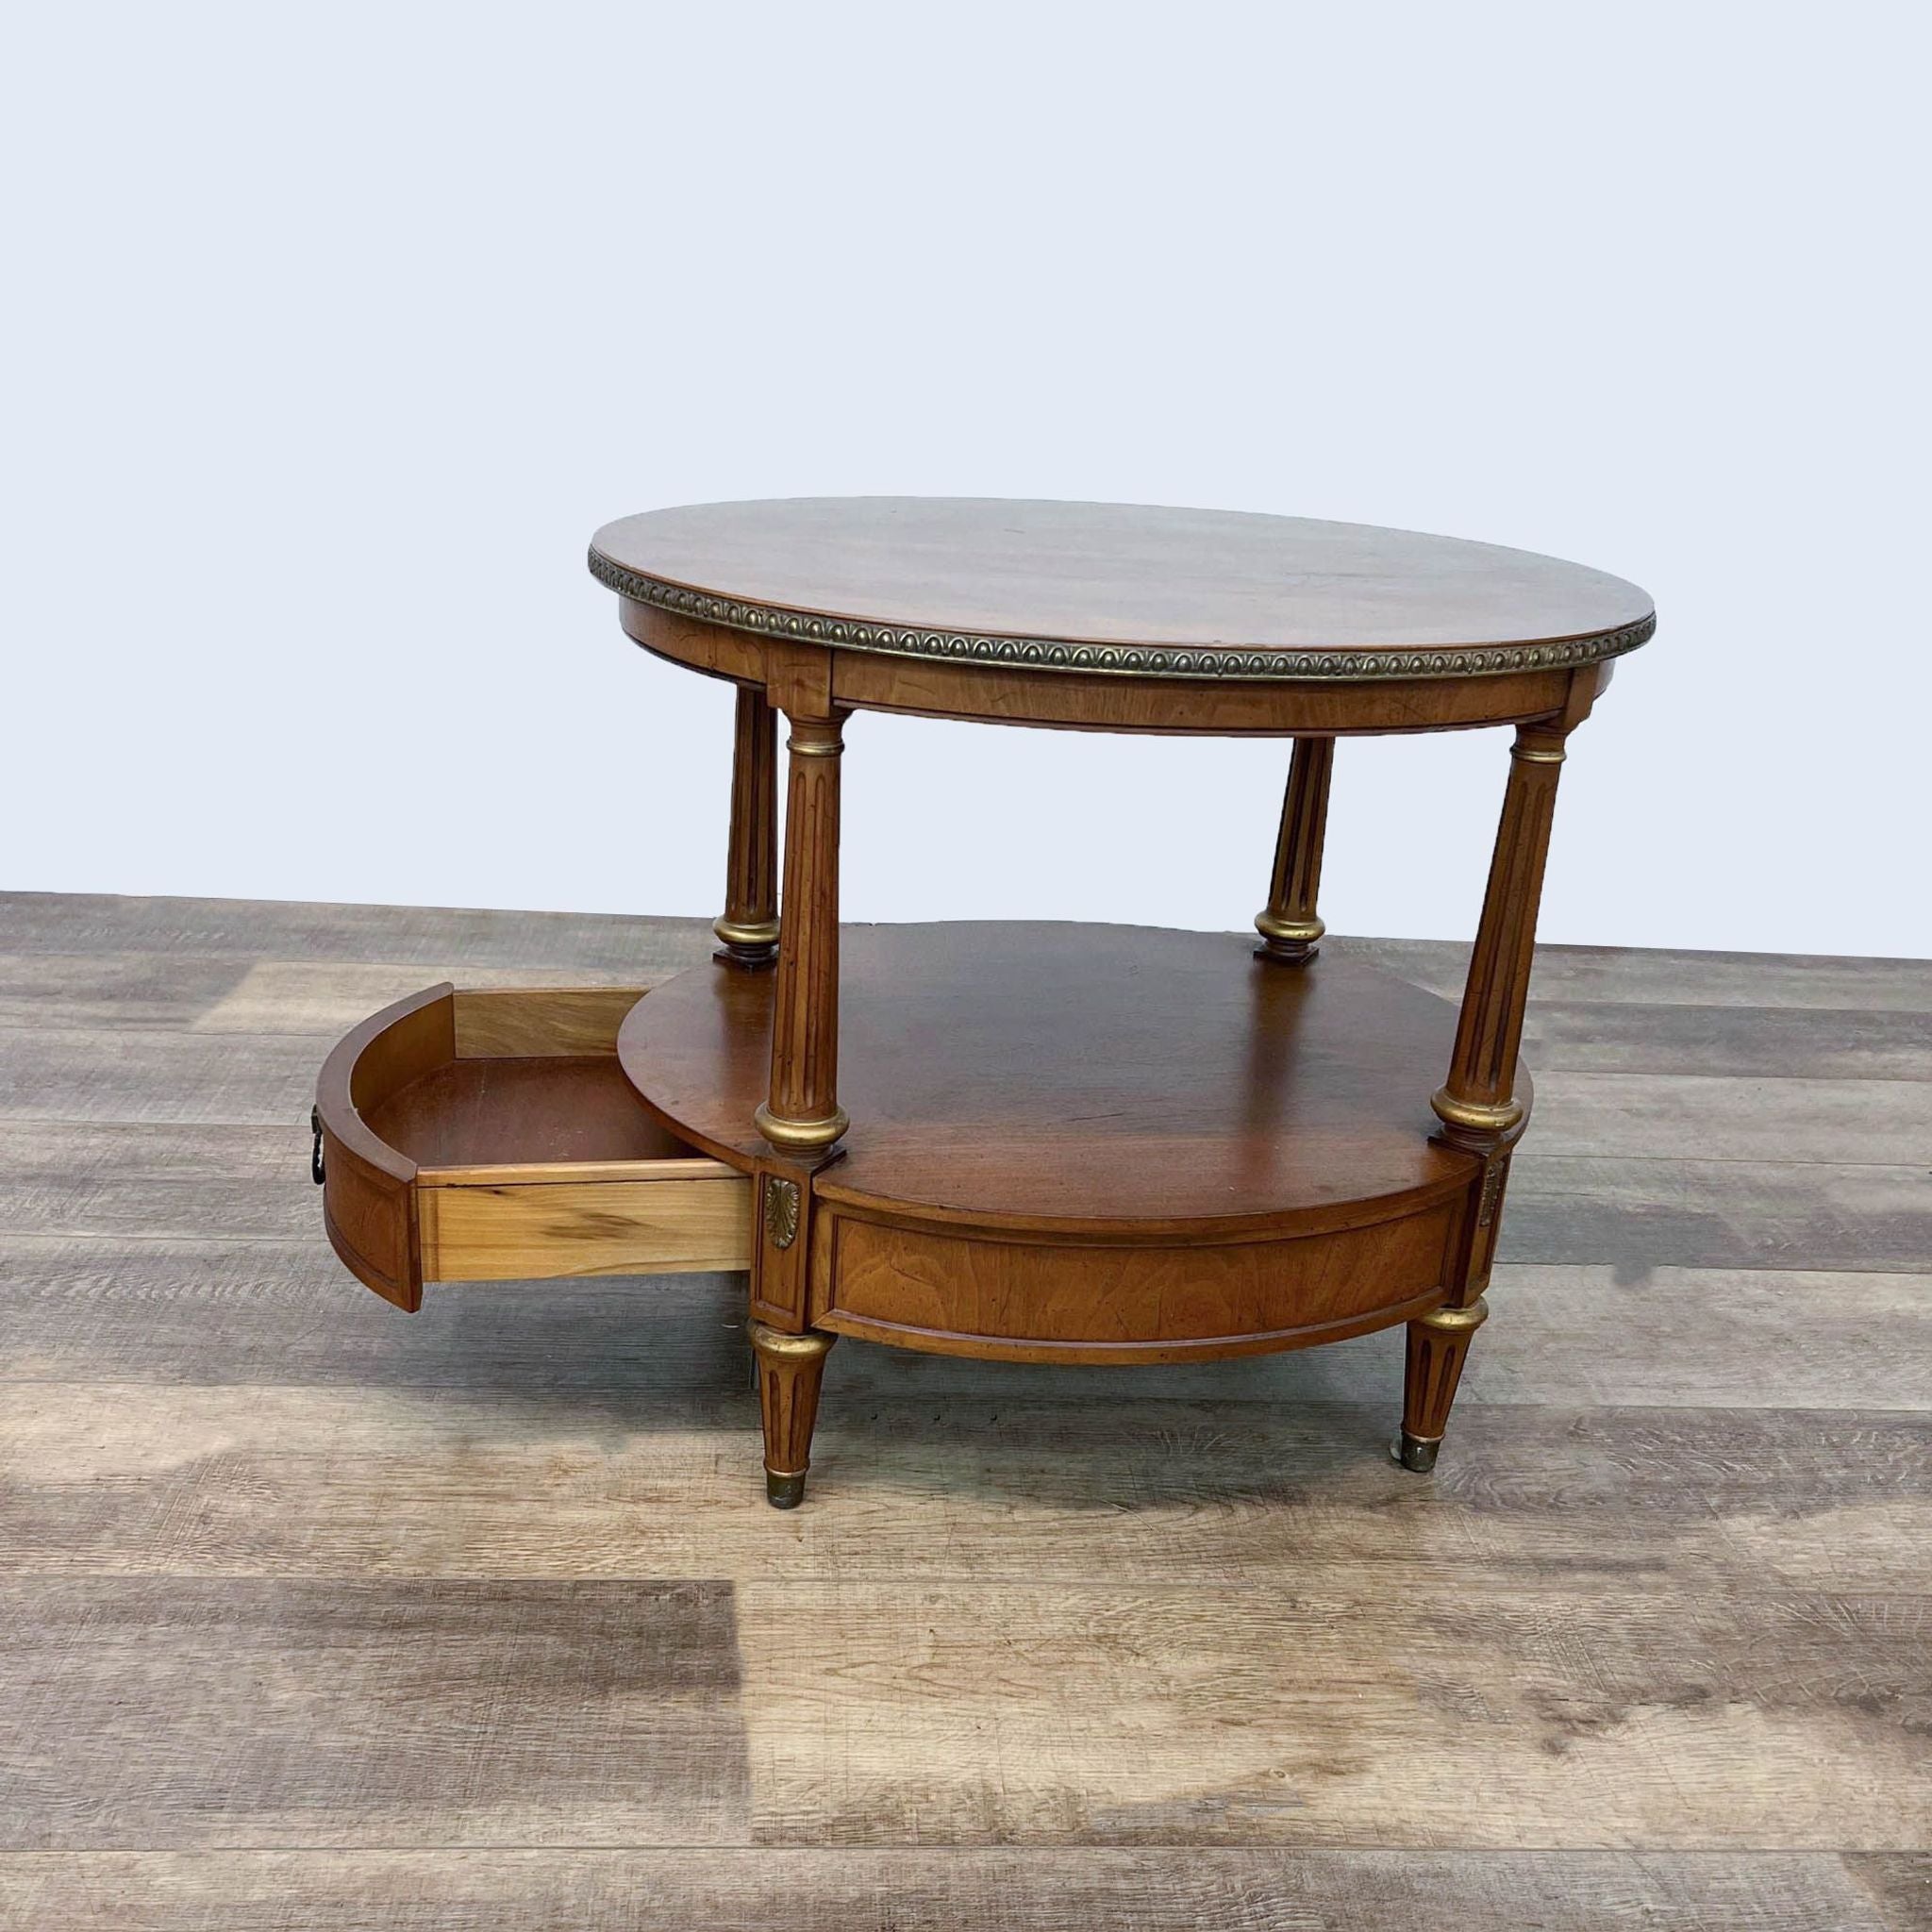 Henredon end table showing open drawer, fluted legs, detailed top edge, on a wooden floor.